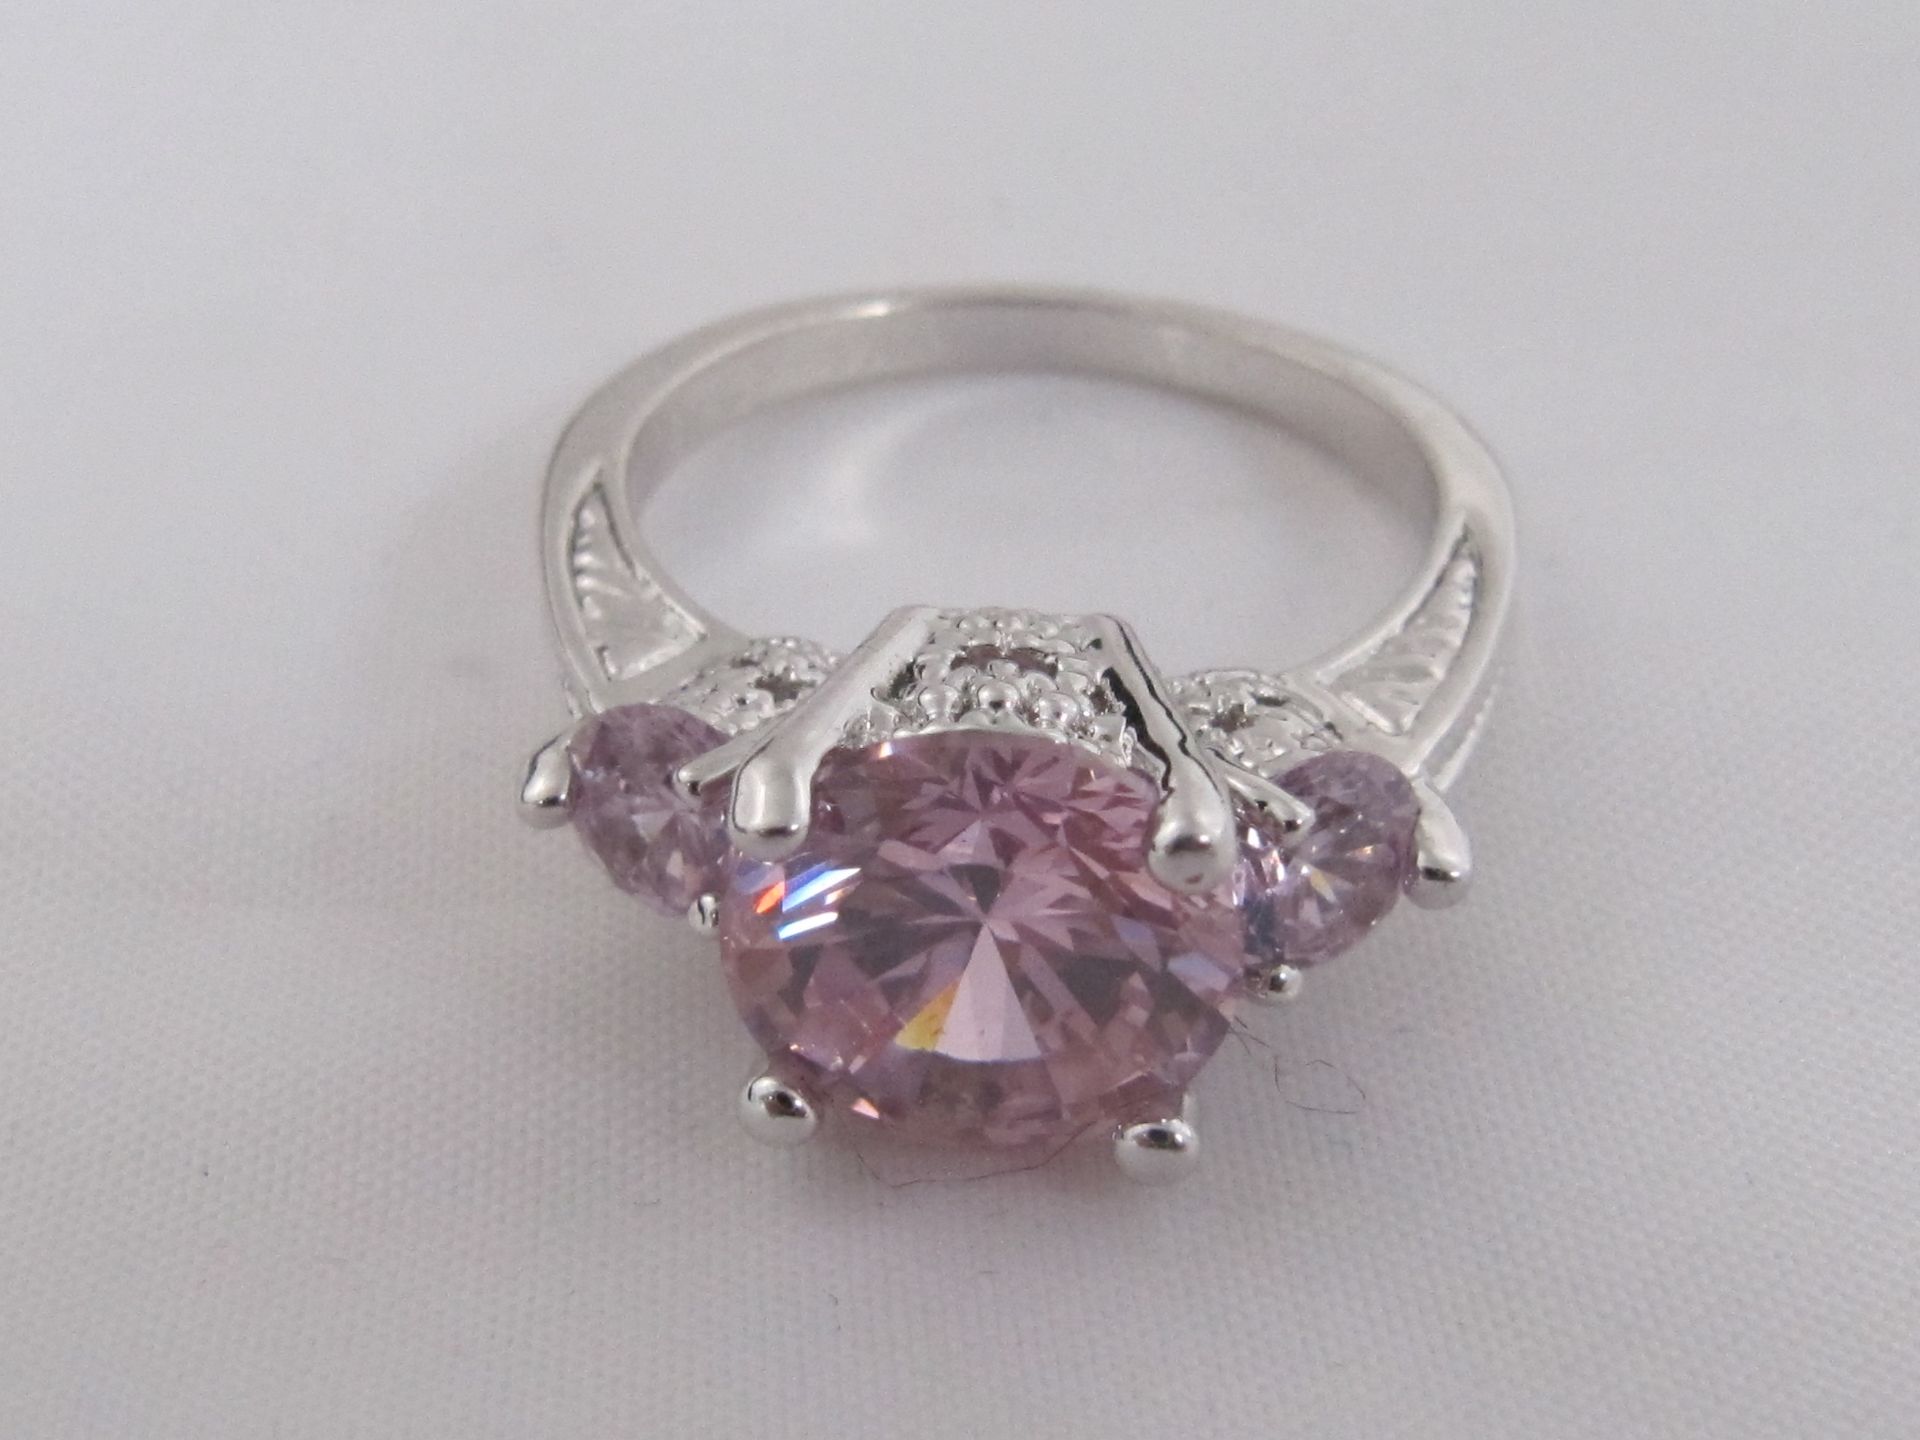 10k White Gold Filled with Pink Sapphires. Size P. - Image 5 of 5